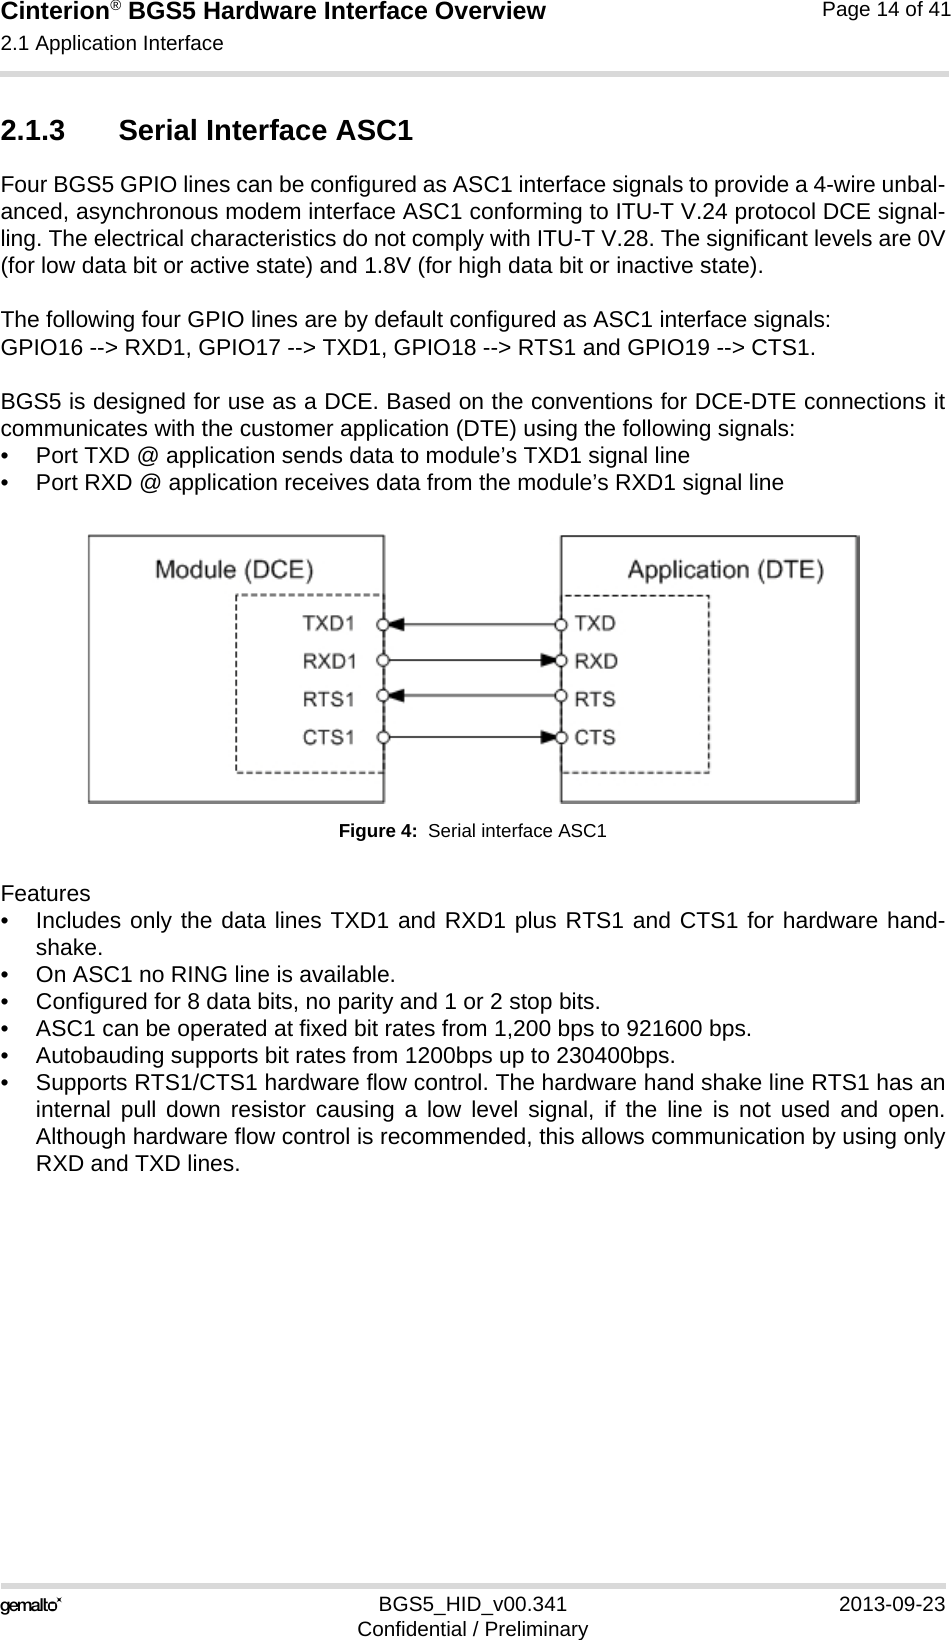 Cinterion® BGS5 Hardware Interface Overview2.1 Application Interface23BGS5_HID_v00.341 2013-09-23Confidential / PreliminaryPage 14 of 412.1.3 Serial Interface ASC1Four BGS5 GPIO lines can be configured as ASC1 interface signals to provide a 4-wire unbal-anced, asynchronous modem interface ASC1 conforming to ITU-T V.24 protocol DCE signal-ling. The electrical characteristics do not comply with ITU-T V.28. The significant levels are 0V(for low data bit or active state) and 1.8V (for high data bit or inactive state). The following four GPIO lines are by default configured as ASC1 interface signals:GPIO16 --&gt; RXD1, GPIO17 --&gt; TXD1, GPIO18 --&gt; RTS1 and GPIO19 --&gt; CTS1.BGS5 is designed for use as a DCE. Based on the conventions for DCE-DTE connections itcommunicates with the customer application (DTE) using the following signals:• Port TXD @ application sends data to module’s TXD1 signal line• Port RXD @ application receives data from the module’s RXD1 signal lineFigure 4:  Serial interface ASC1Features• Includes only the data lines TXD1 and RXD1 plus RTS1 and CTS1 for hardware hand-shake. • On ASC1 no RING line is available.• Configured for 8 data bits, no parity and 1 or 2 stop bits.• ASC1 can be operated at fixed bit rates from 1,200 bps to 921600 bps.• Autobauding supports bit rates from 1200bps up to 230400bps.• Supports RTS1/CTS1 hardware flow control. The hardware hand shake line RTS1 has aninternal pull down resistor causing a low level signal, if the line is not used and open.Although hardware flow control is recommended, this allows communication by using onlyRXD and TXD lines.